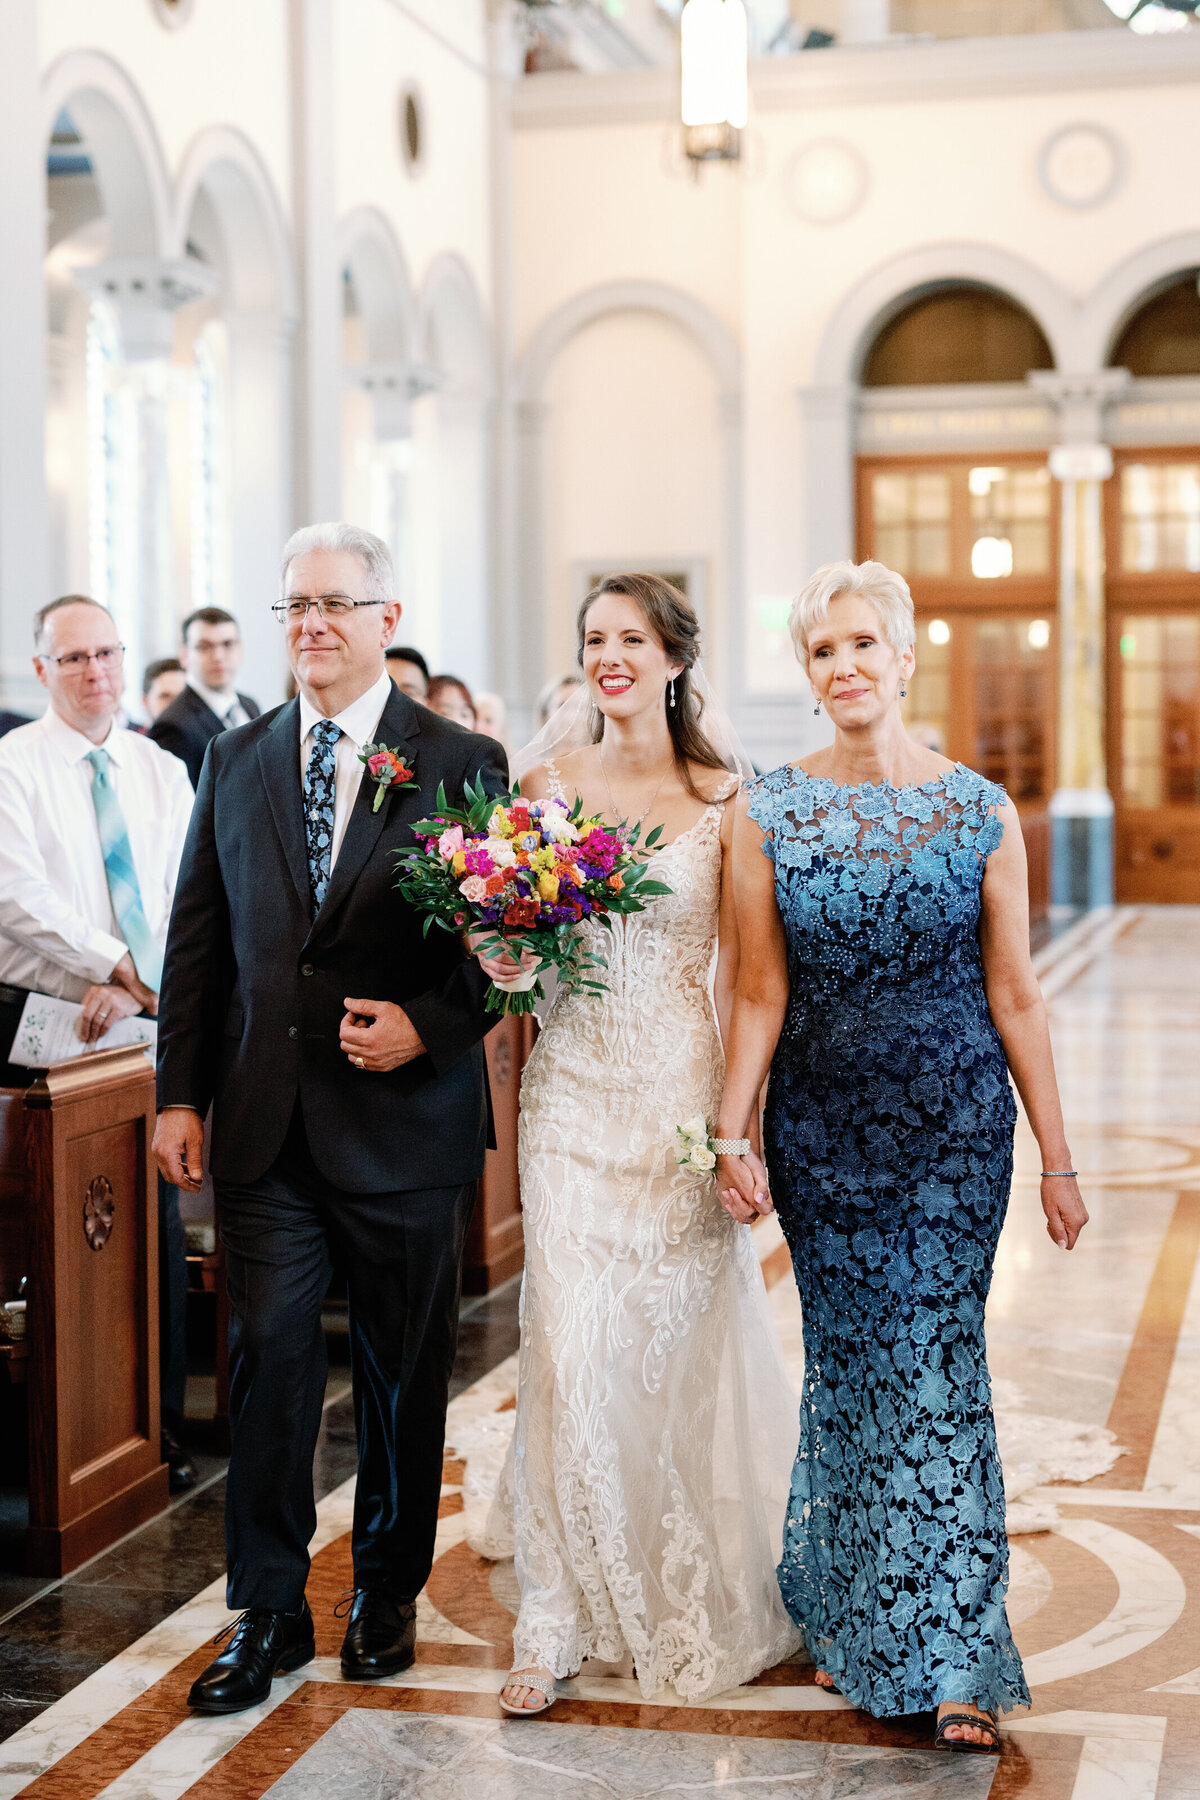 Sonja and Steven - Sacred Heart Cathedral and The Press Room - East Tennessee Wedding Photographer - Alaina René Photography-150